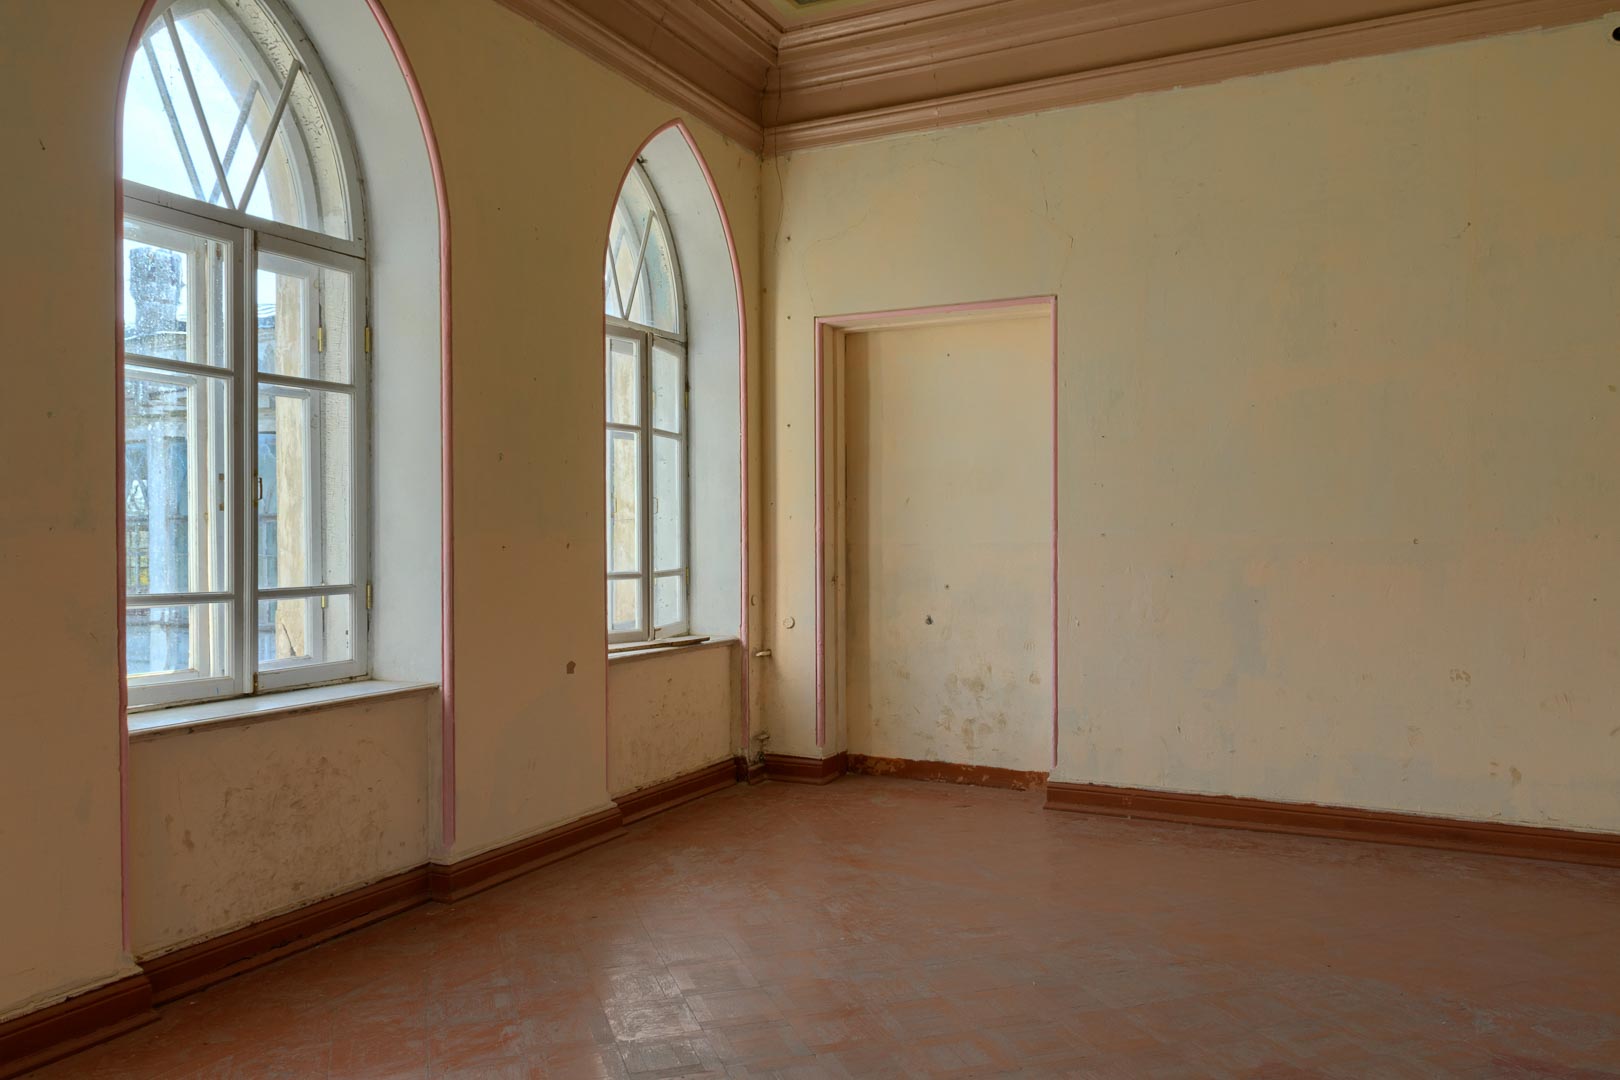 Backplate • ID: 5699 • HDRI Haven - Palace Room With Worn Floor